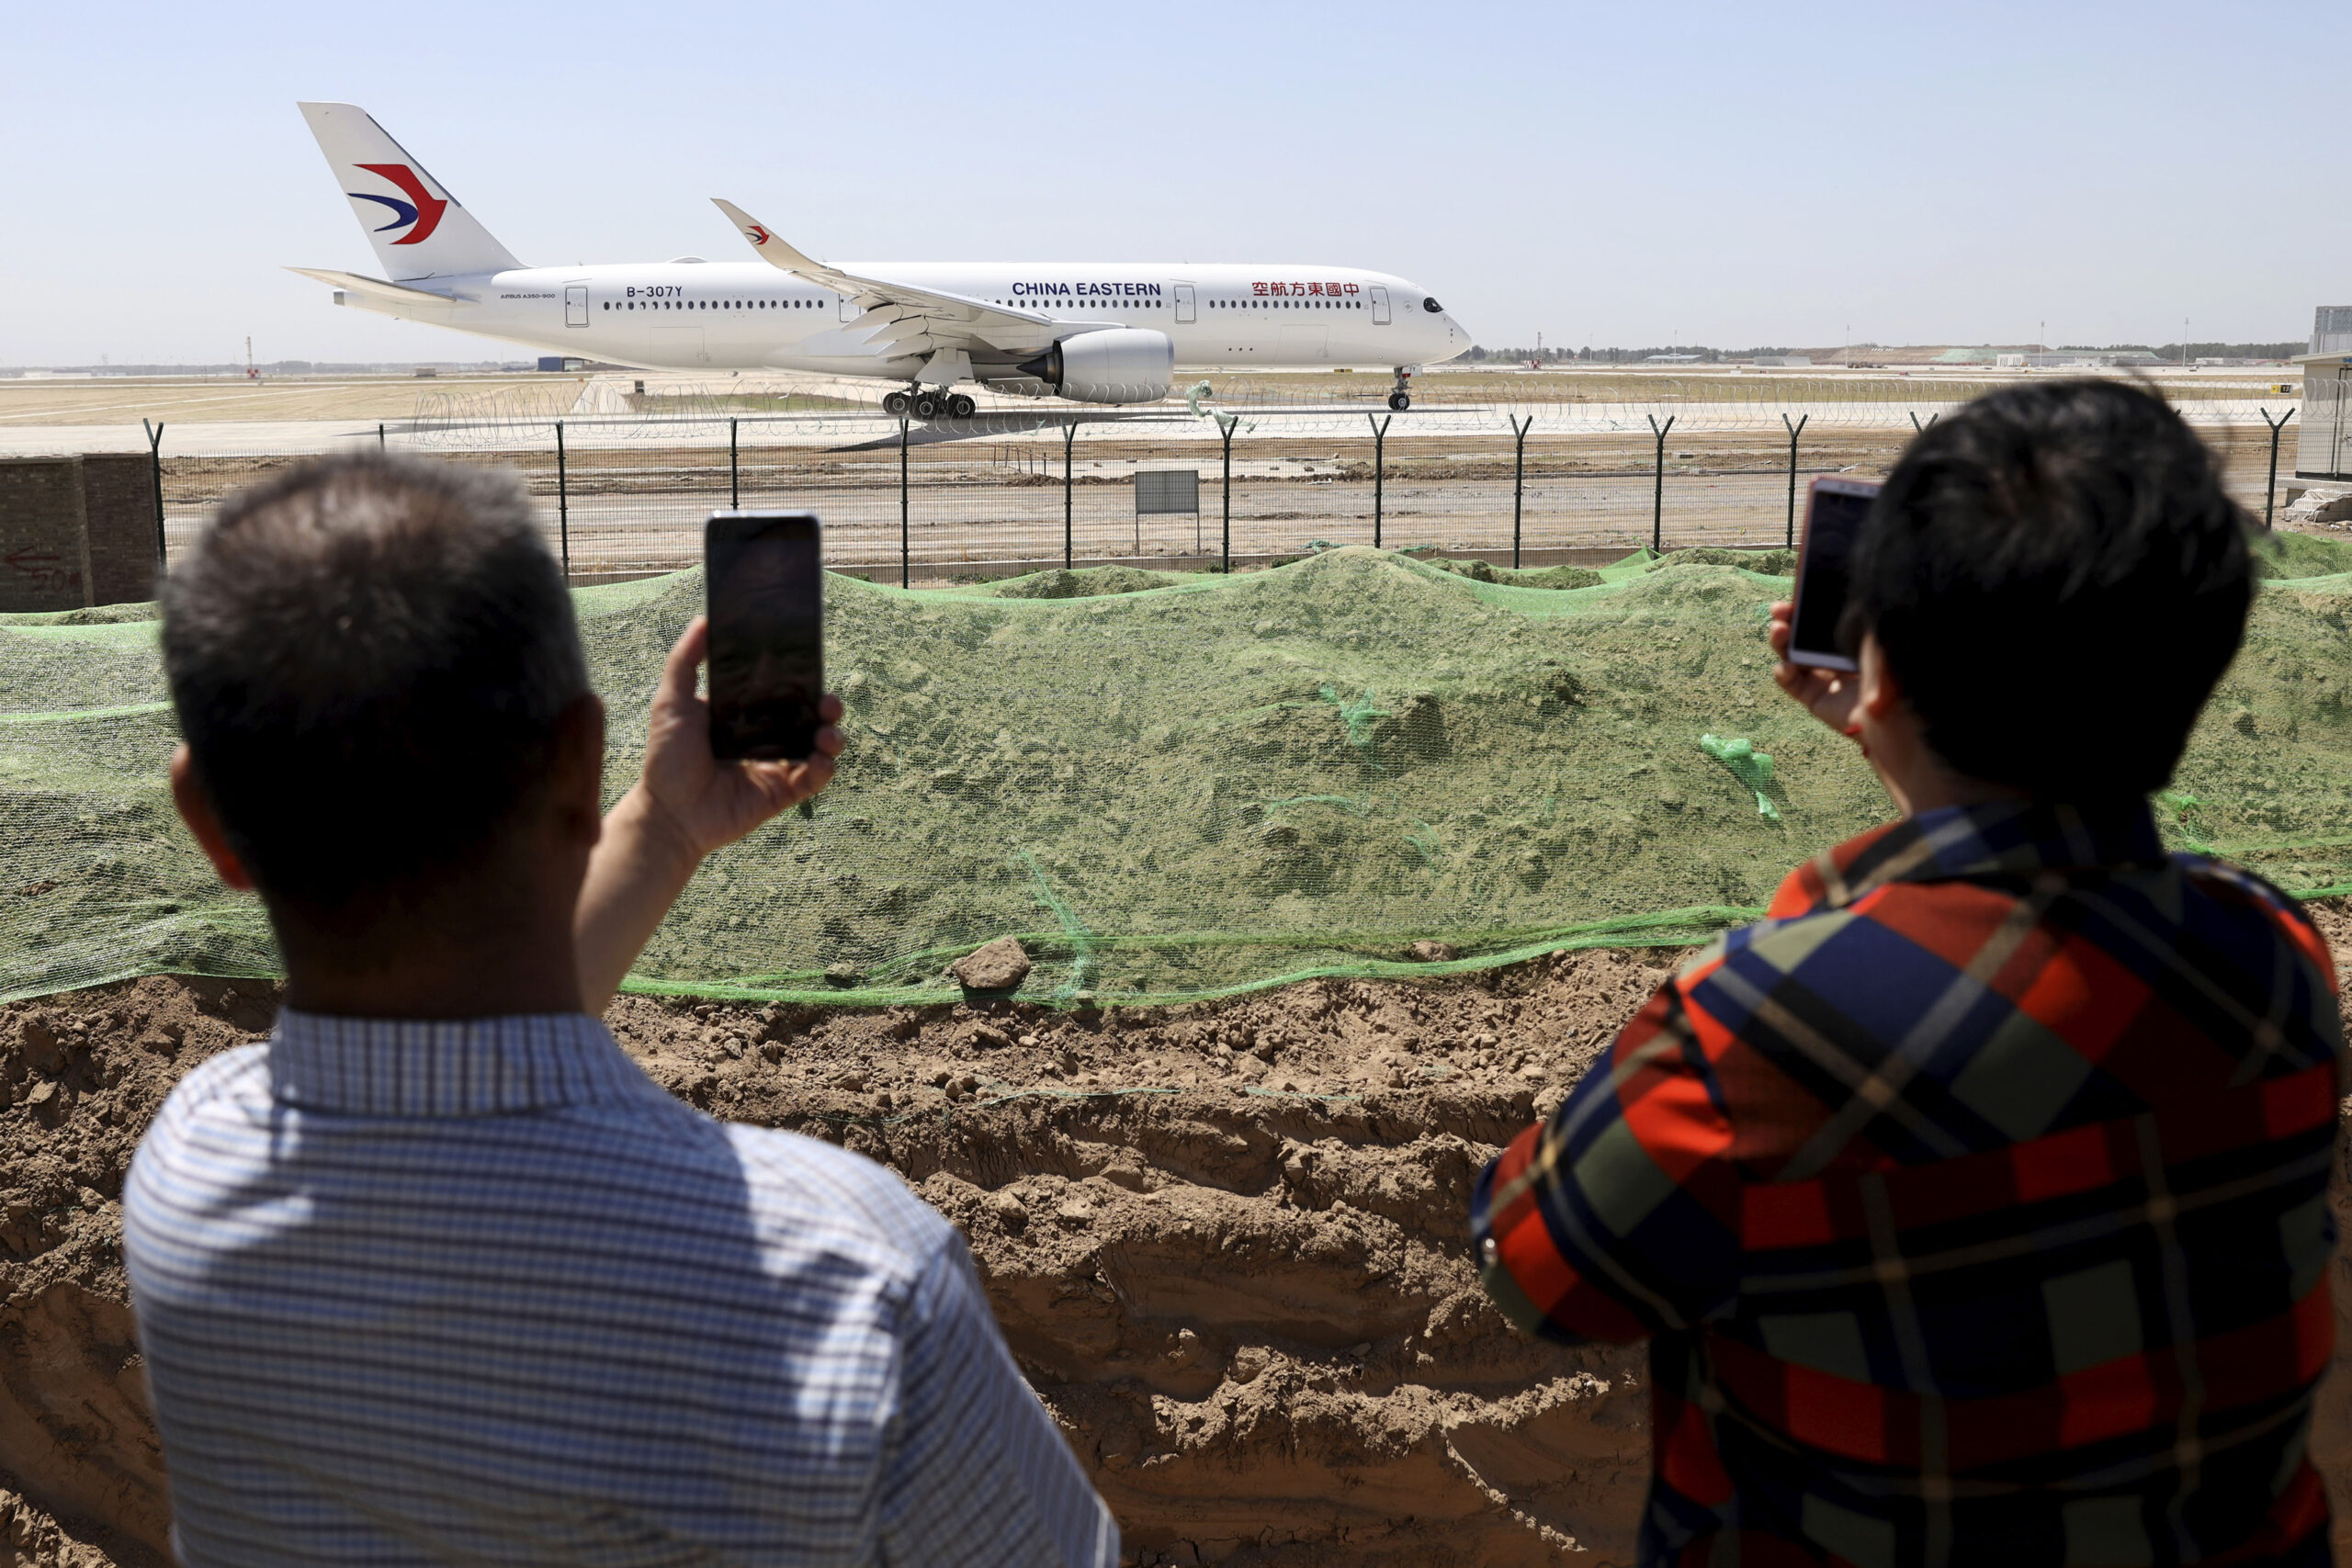 FILE - Residents watch as a China Eastern passenger jet prepares to take off on a test flight from the new Beijing Daxing International Airport on Monday, May 13, 2019. State media are reporting a Chinese airliner from China Eastern with 133 people on board crashed in the southern province of Guangxi on Monday, sparking a mountainside fire. (AP Photo/Ng Han Guan, File)